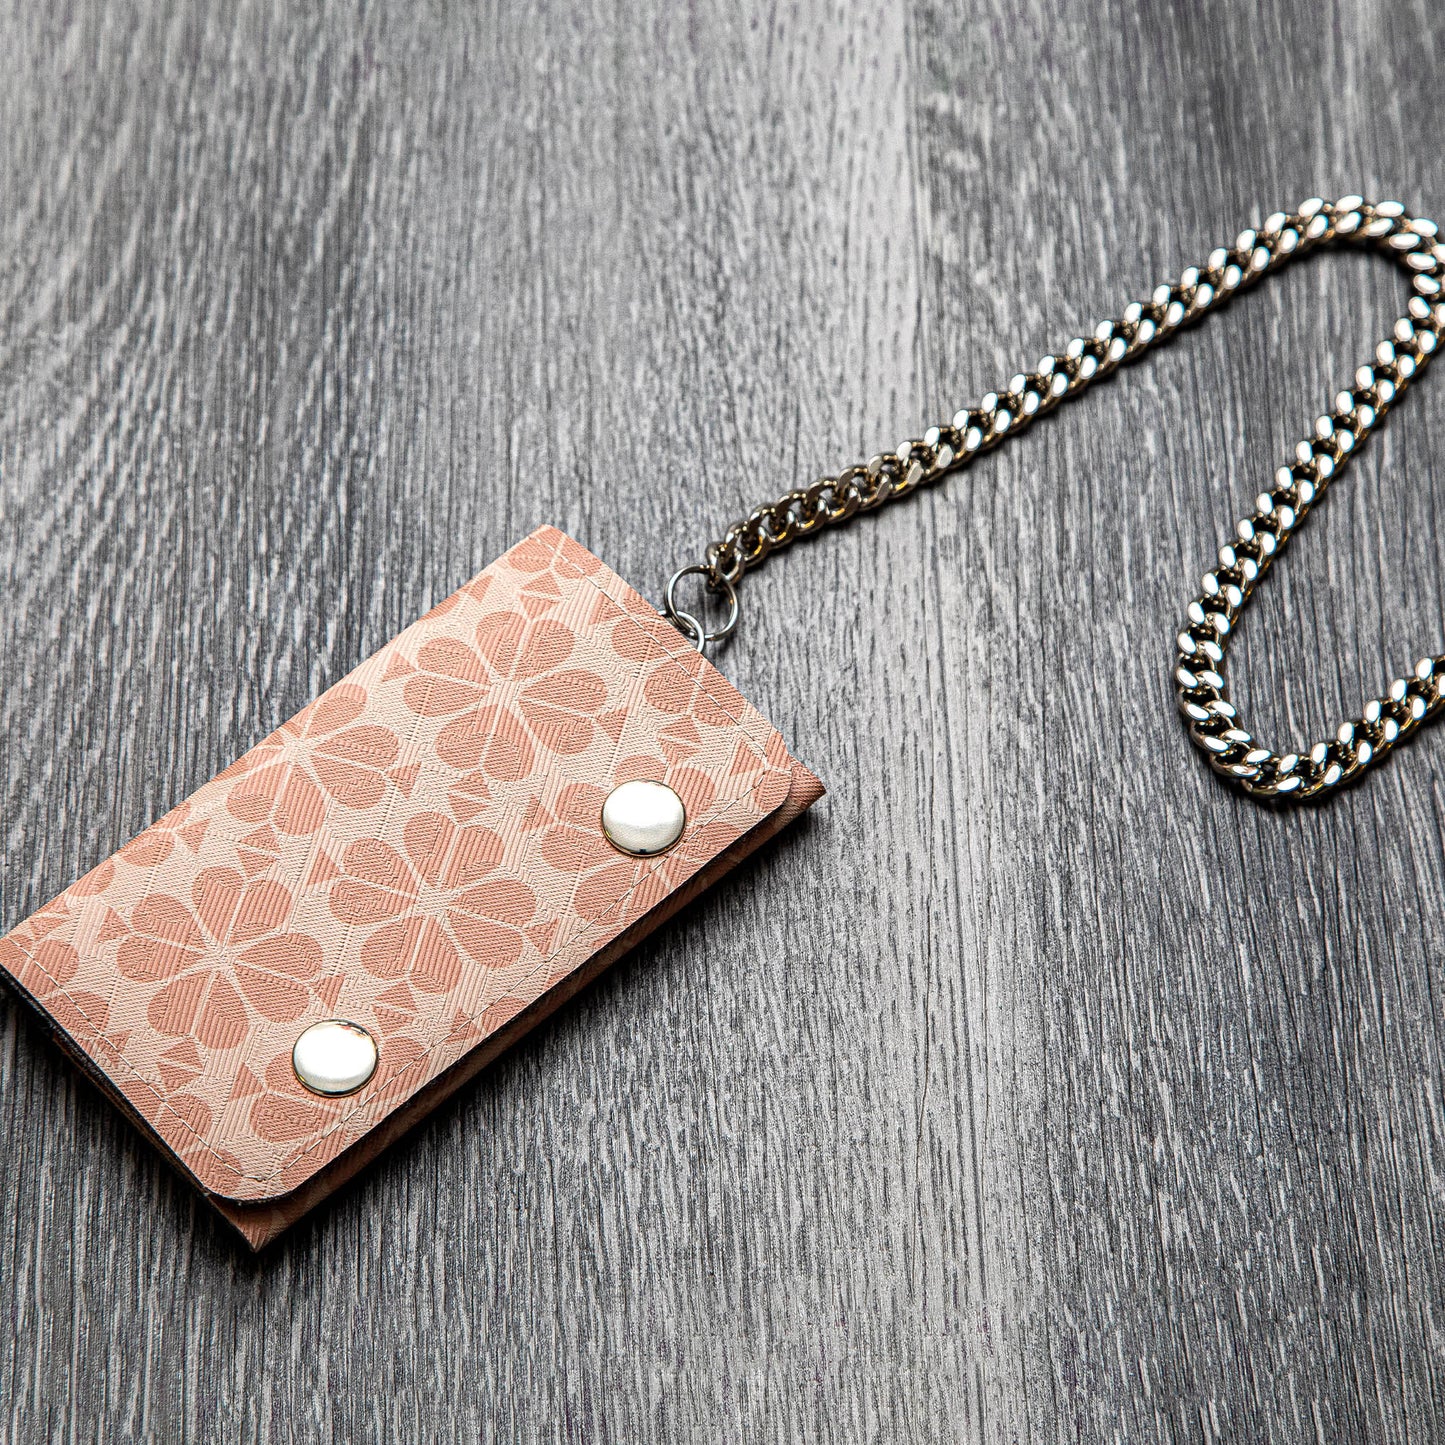 Handcrafted Biker Wallet with Detachable Chain - Cruelty-Free and Fashionably Functional - Pink Faux Leather